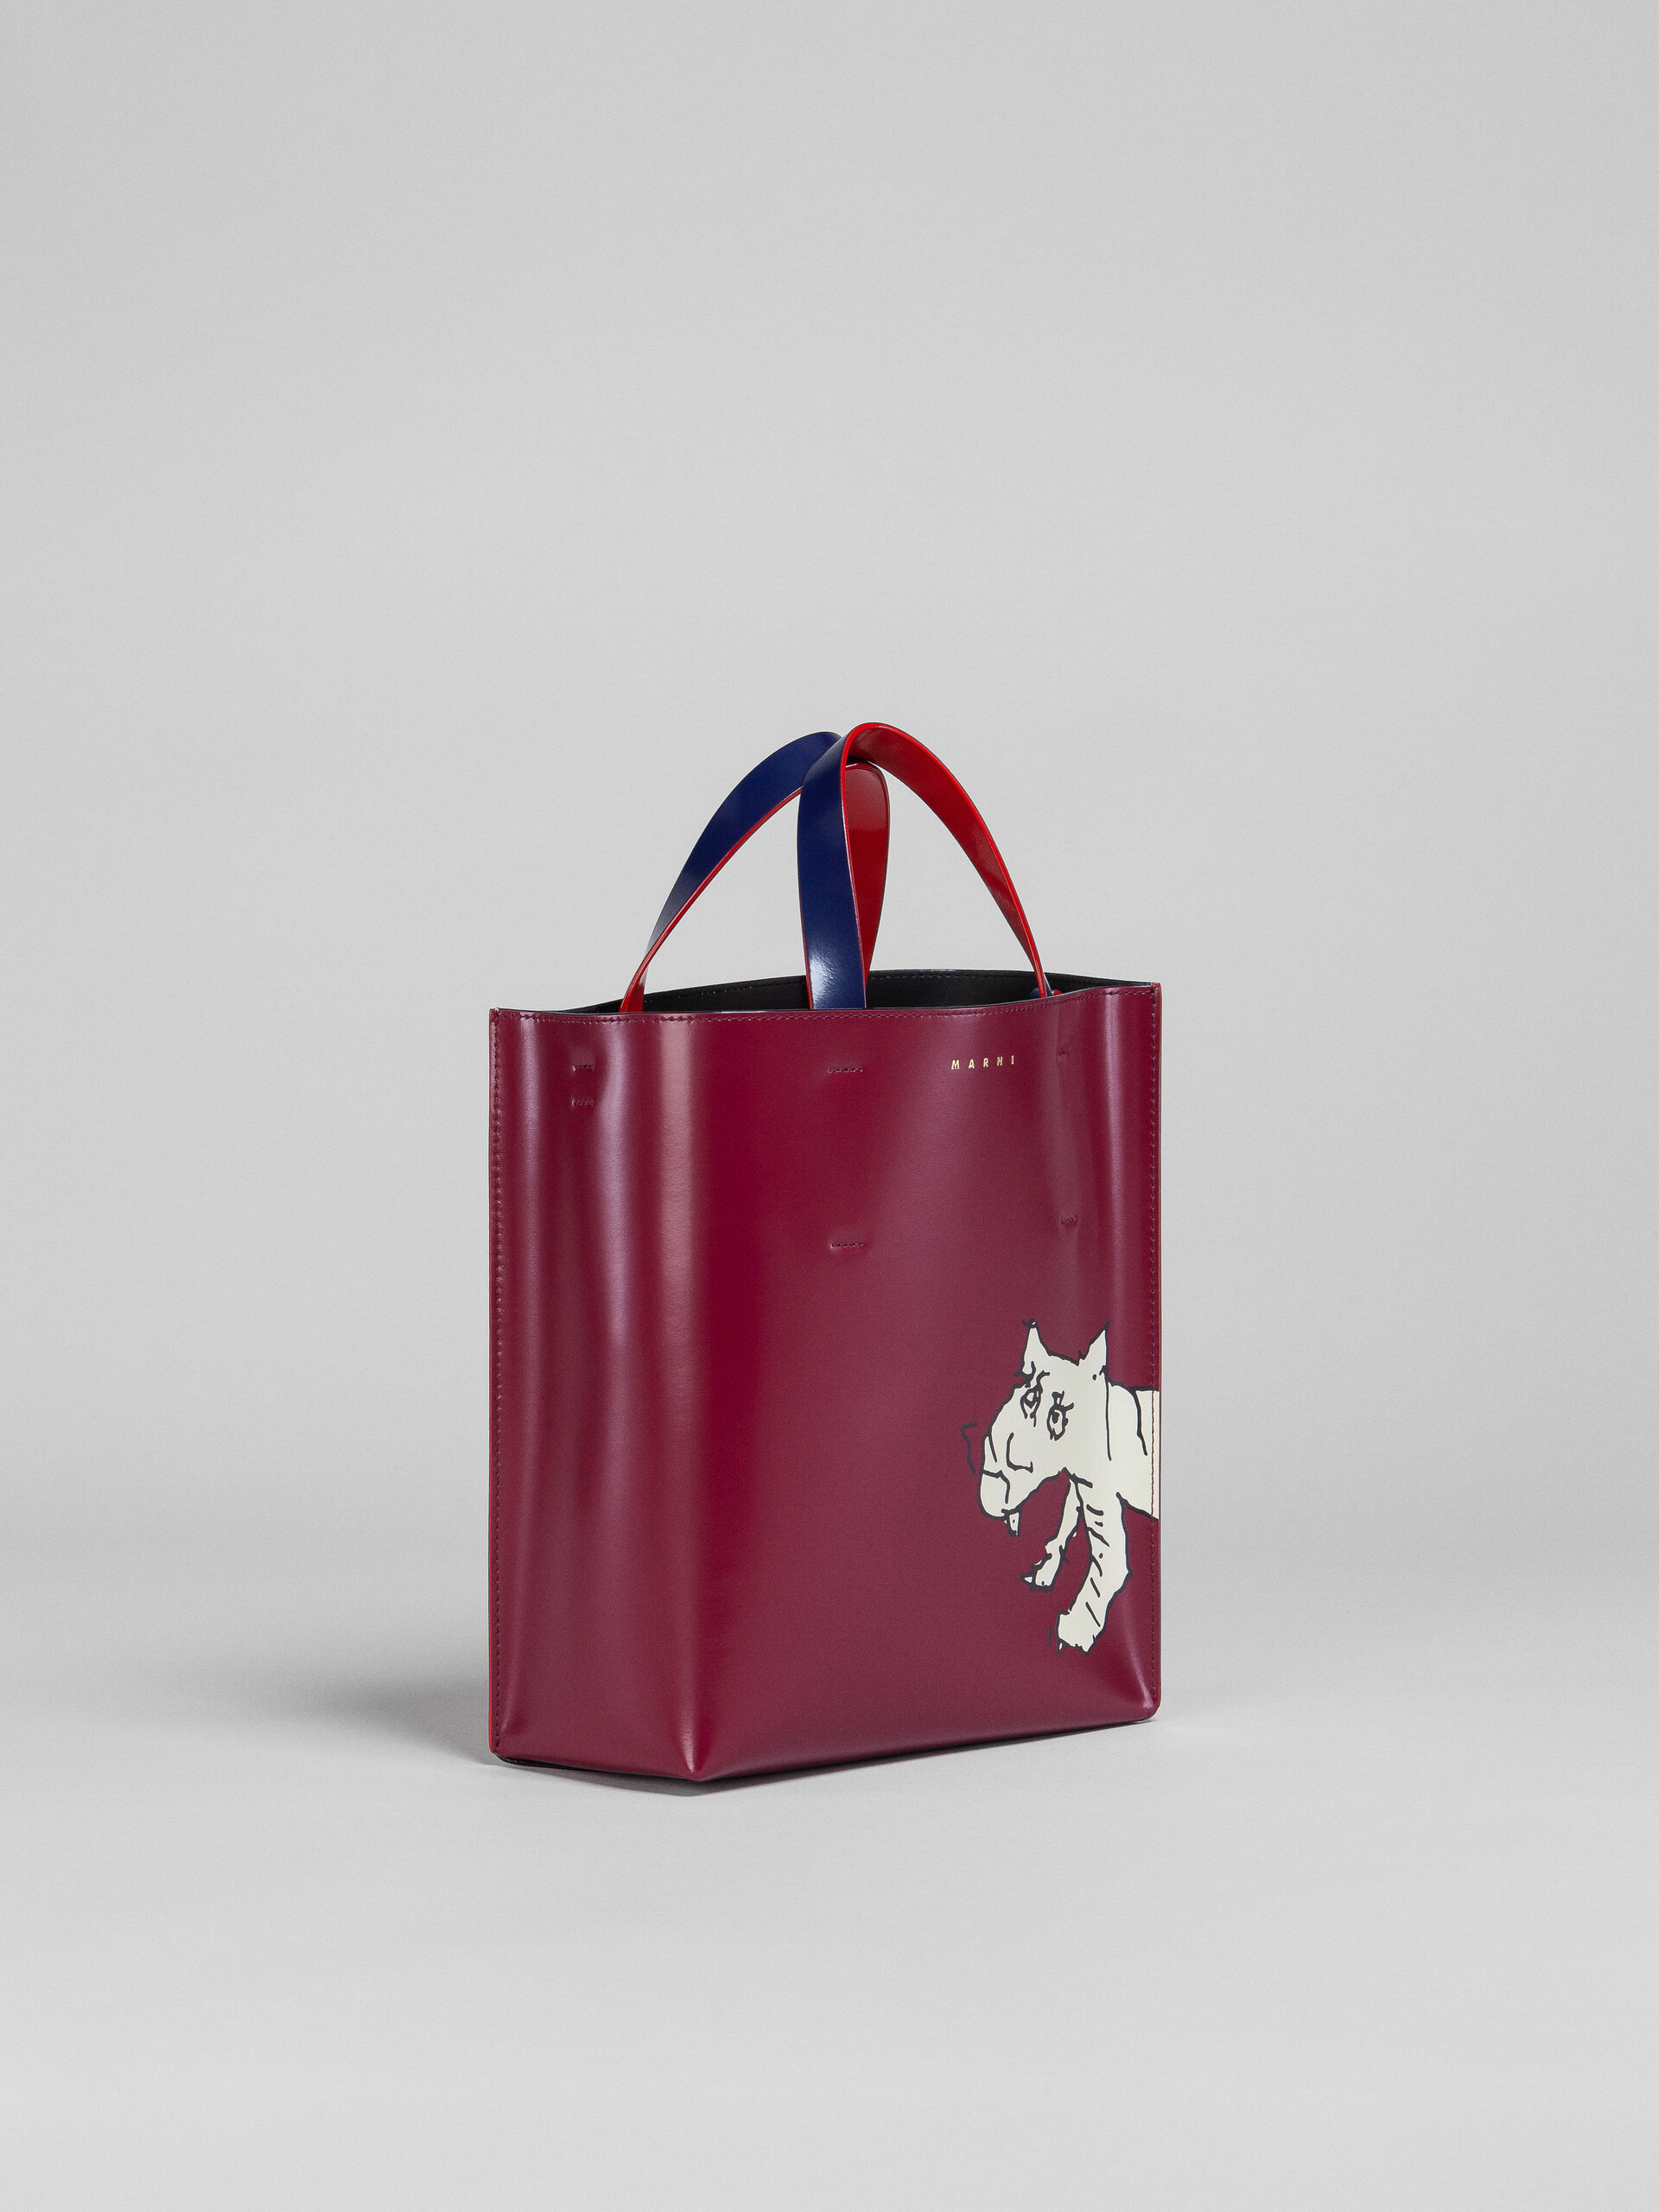 Tiger polished leather small MUSEO bag - Shopping Bags - Image 6